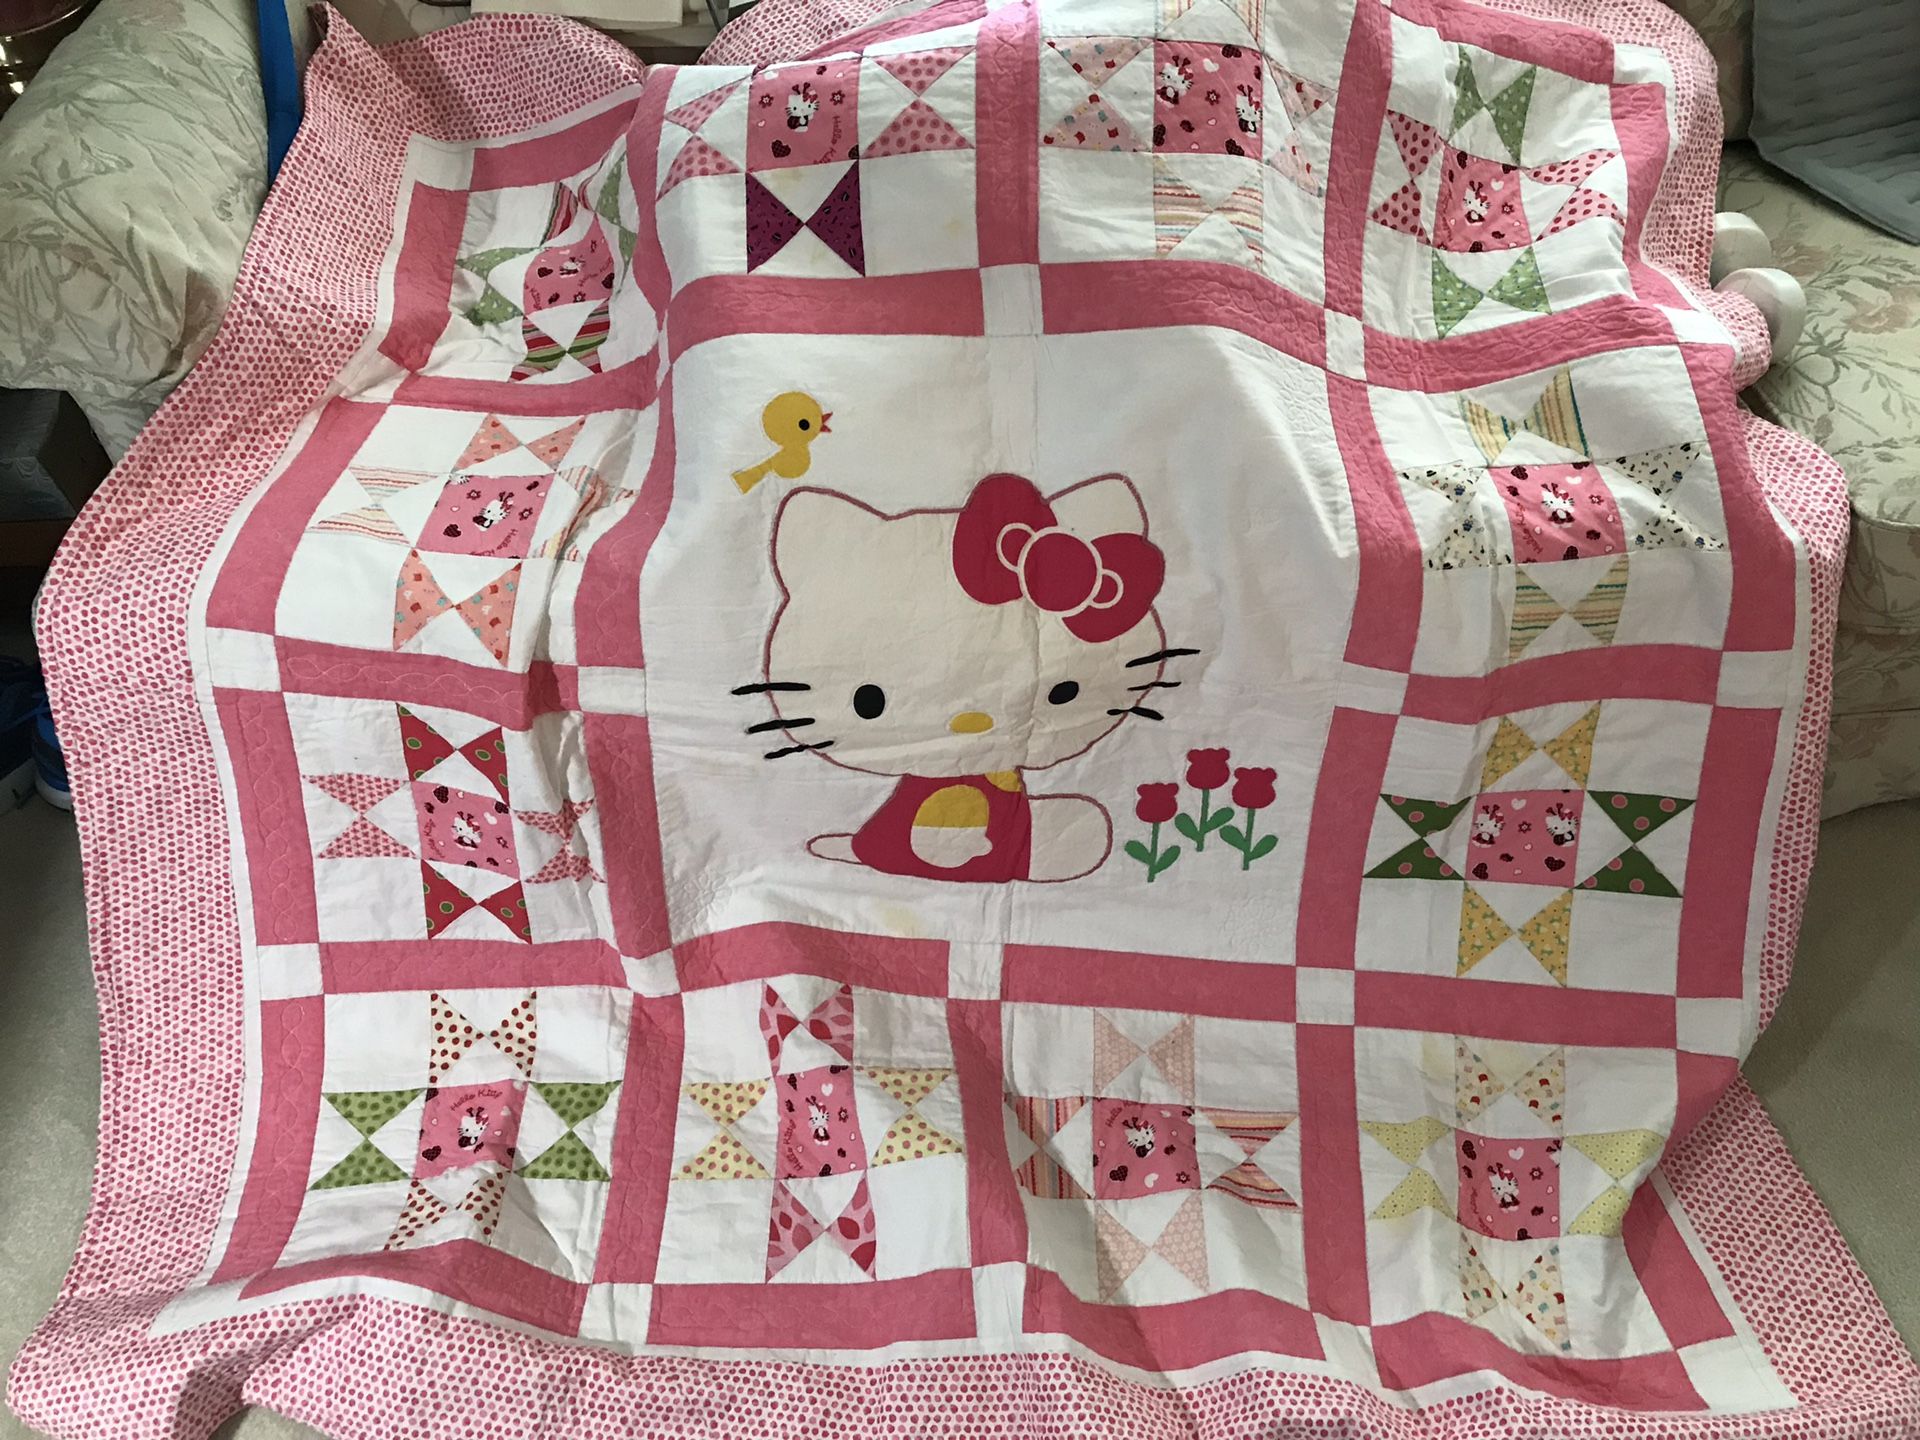 BEAUTIFULLY HAND SOWN ..... HELLO KITTY quilt must see to appreciate